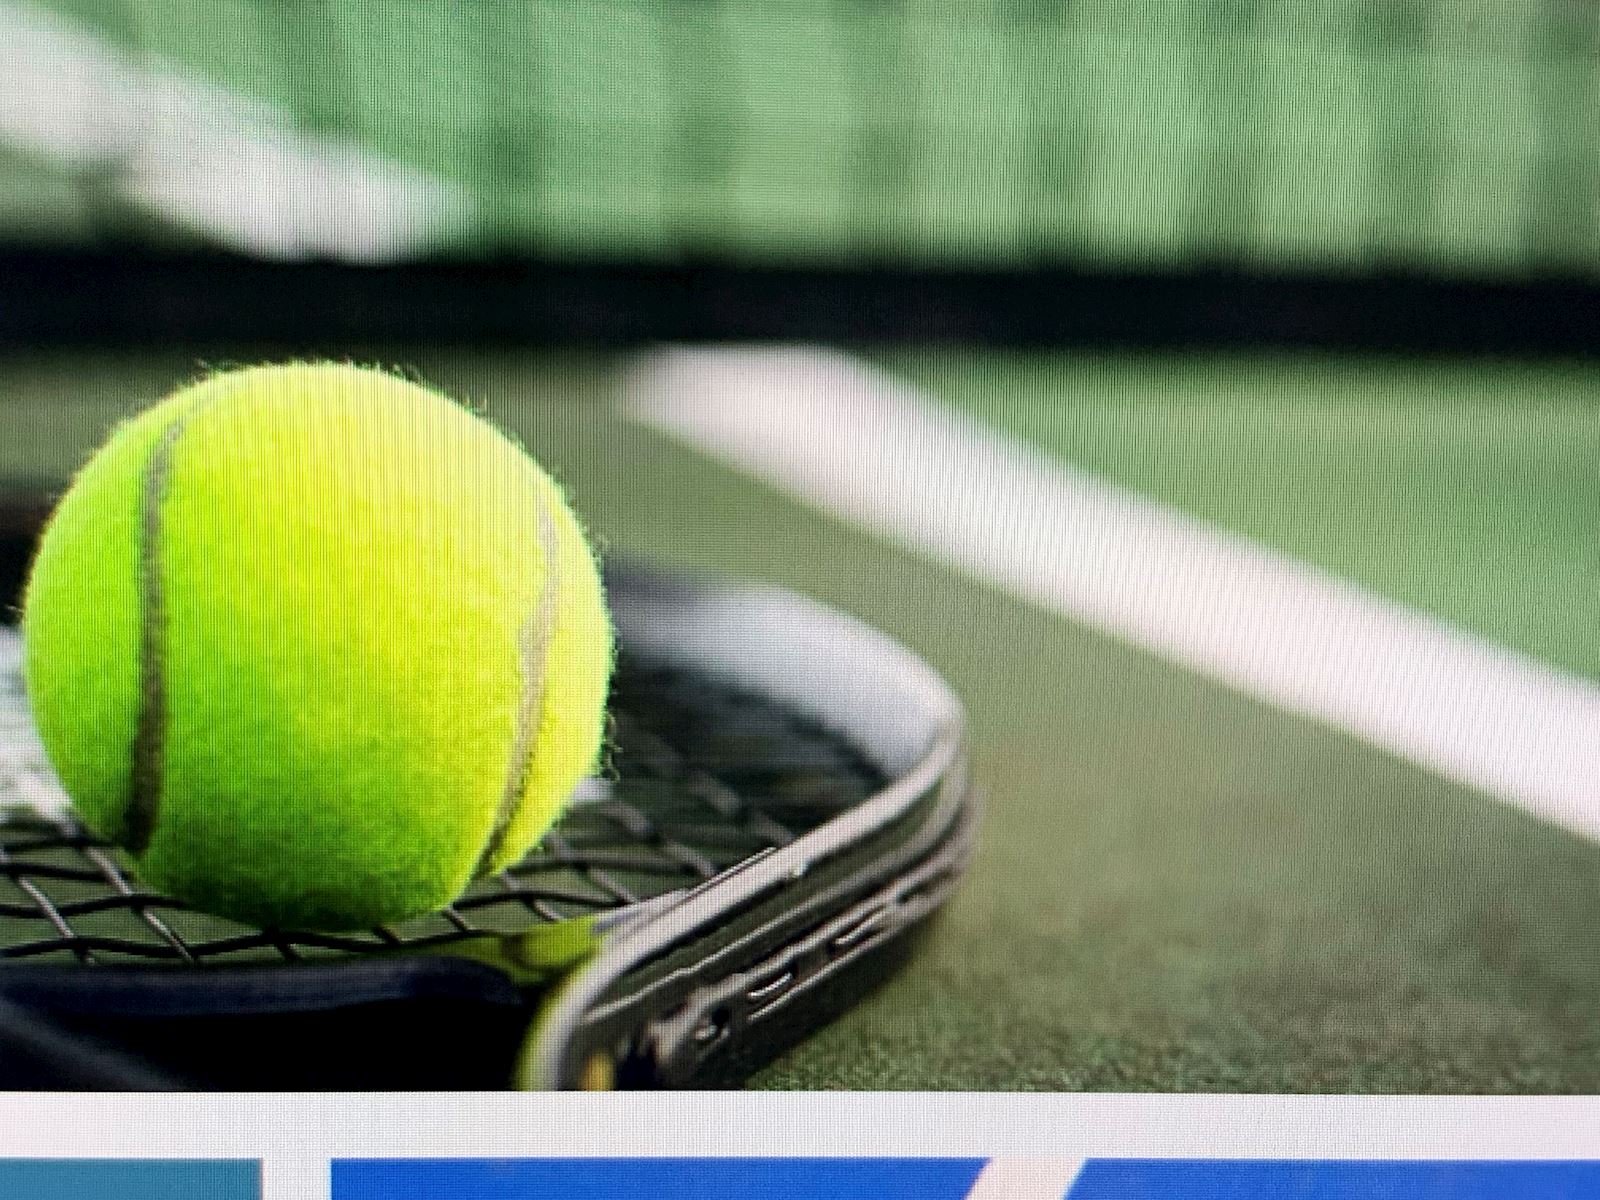 NEISD Official on Instagram: The United States Tennis Association